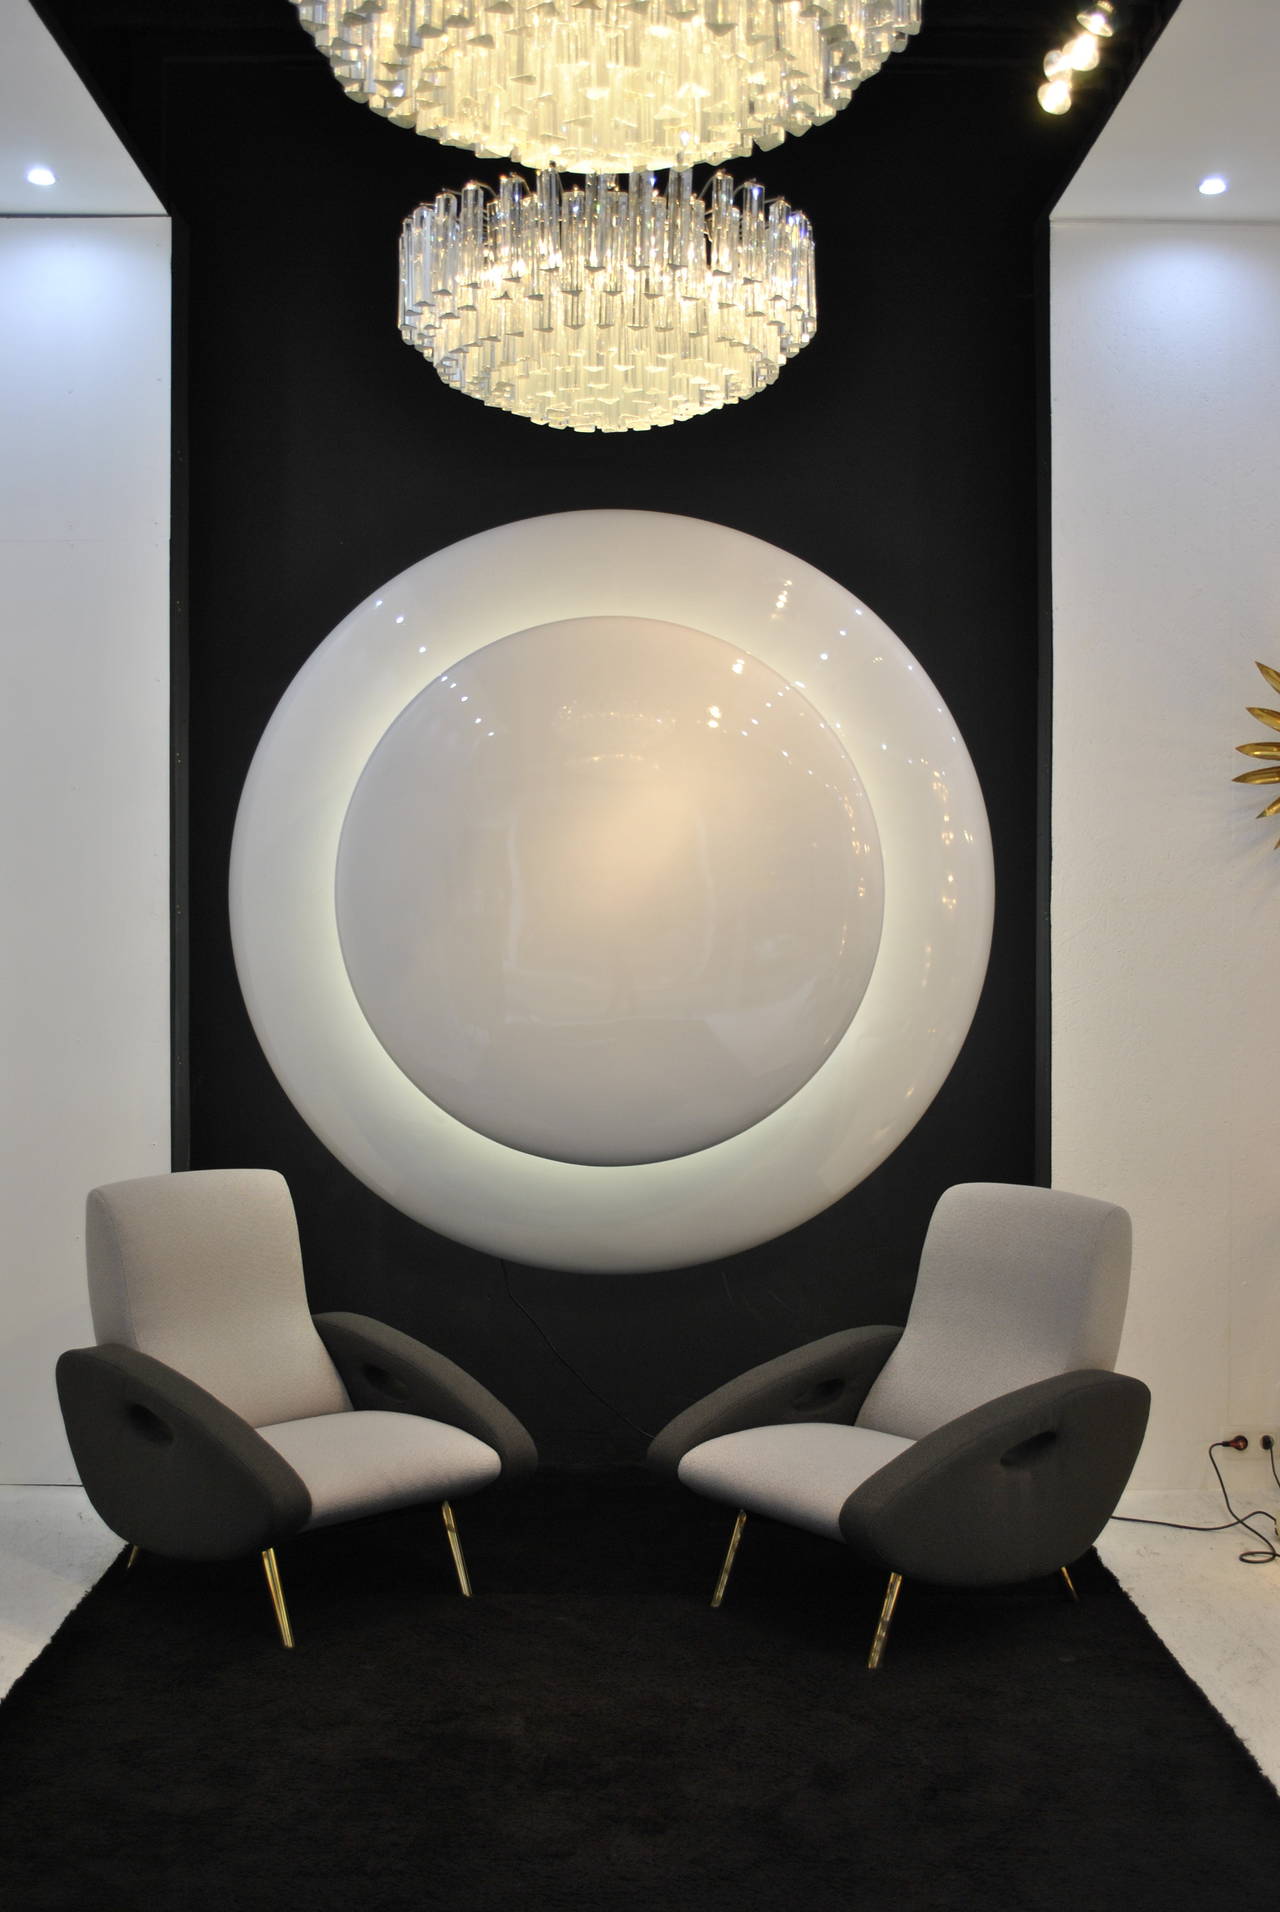 A spectacular piece that is more a wall decoration than a sconce. True Space Age design resin covered molded foam.

We have two pieces available (79inches); originally they are ceiling suspensions that come from a Paris Lounge club. The original